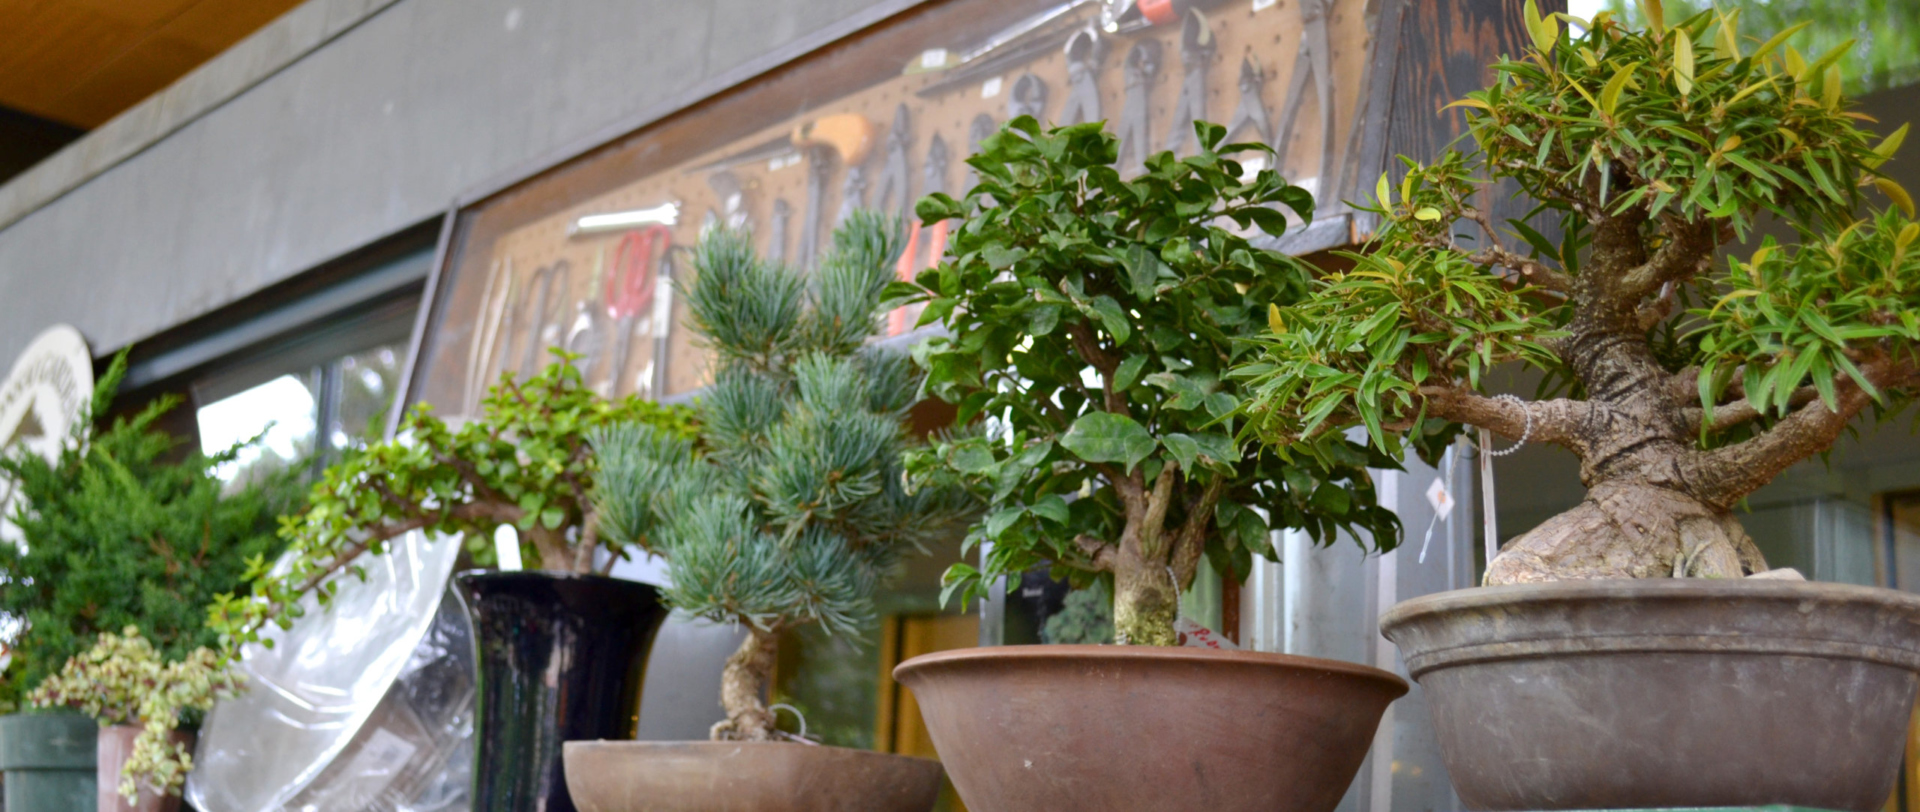 Photograph of several bonsai trees placed on a shelf